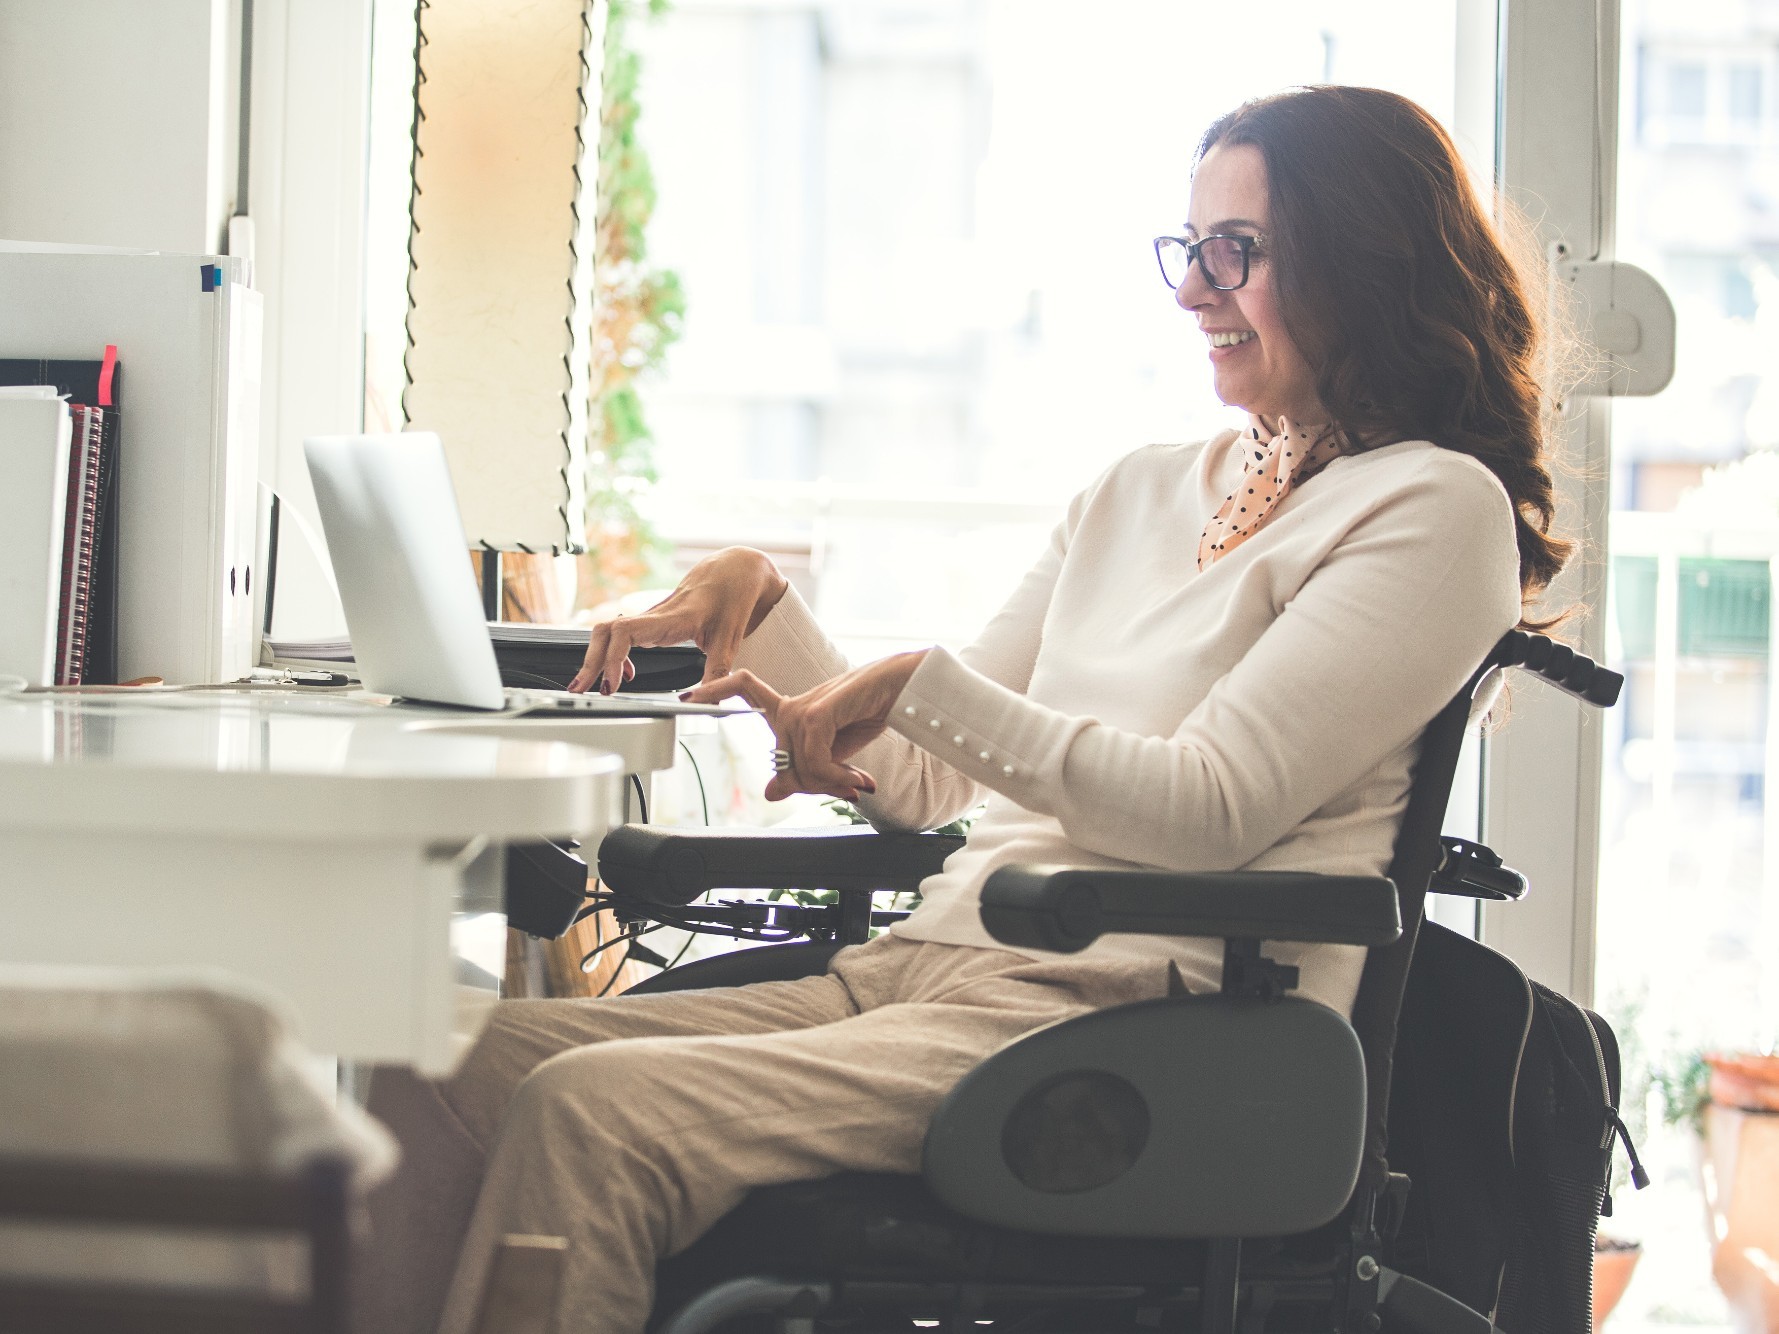 If and when to share details about your disability at work or during your job search